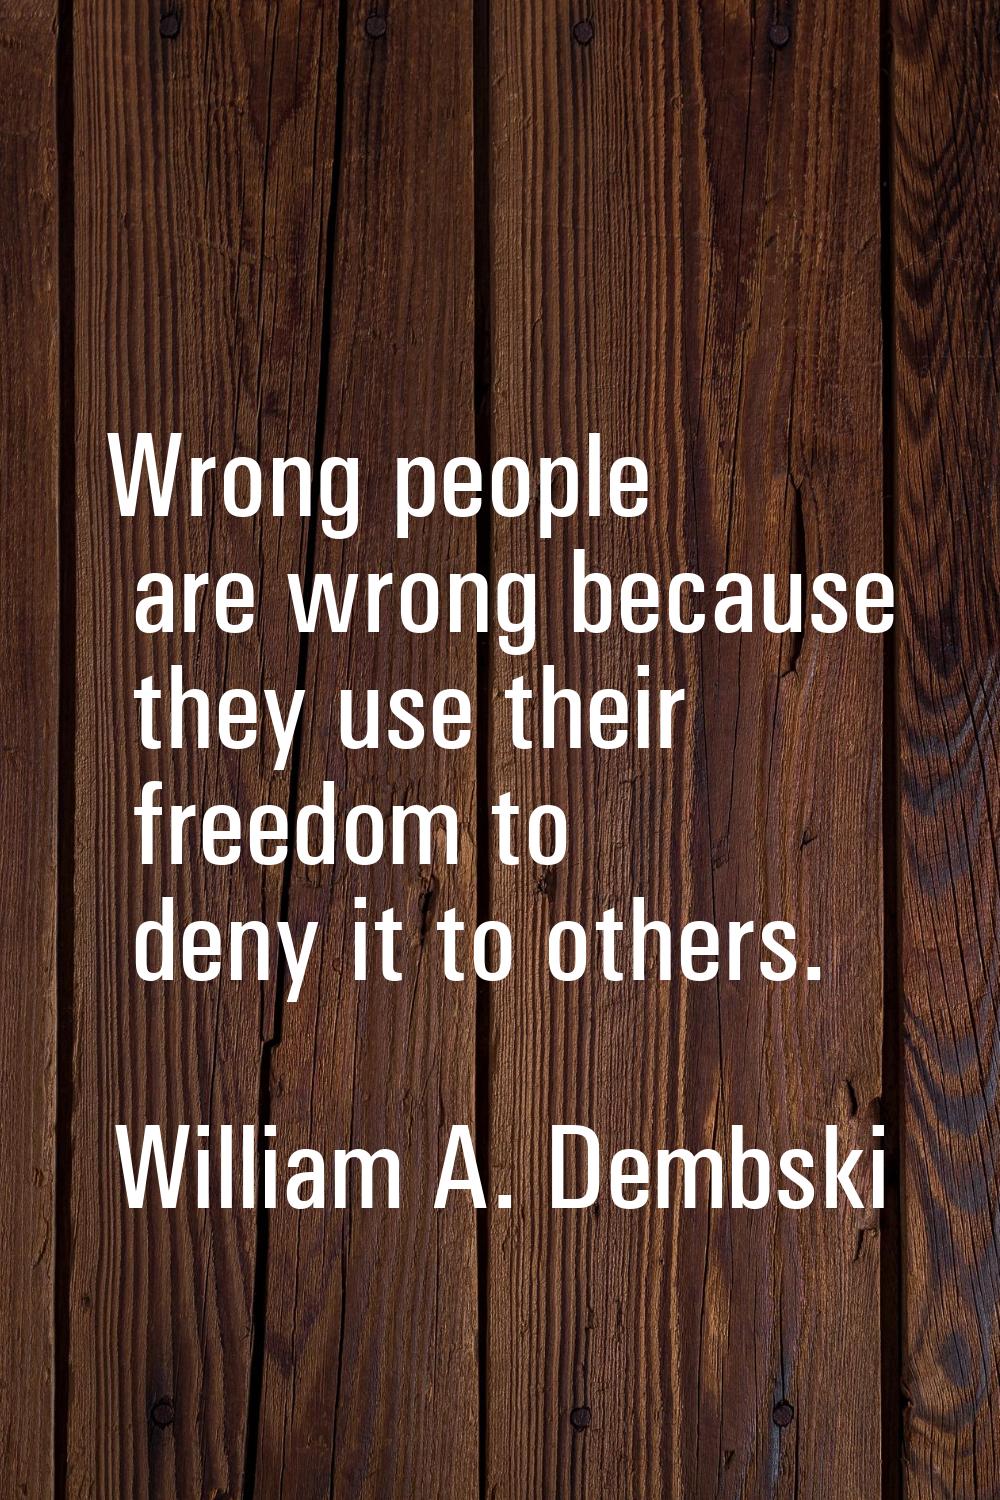 Wrong people are wrong because they use their freedom to deny it to others.